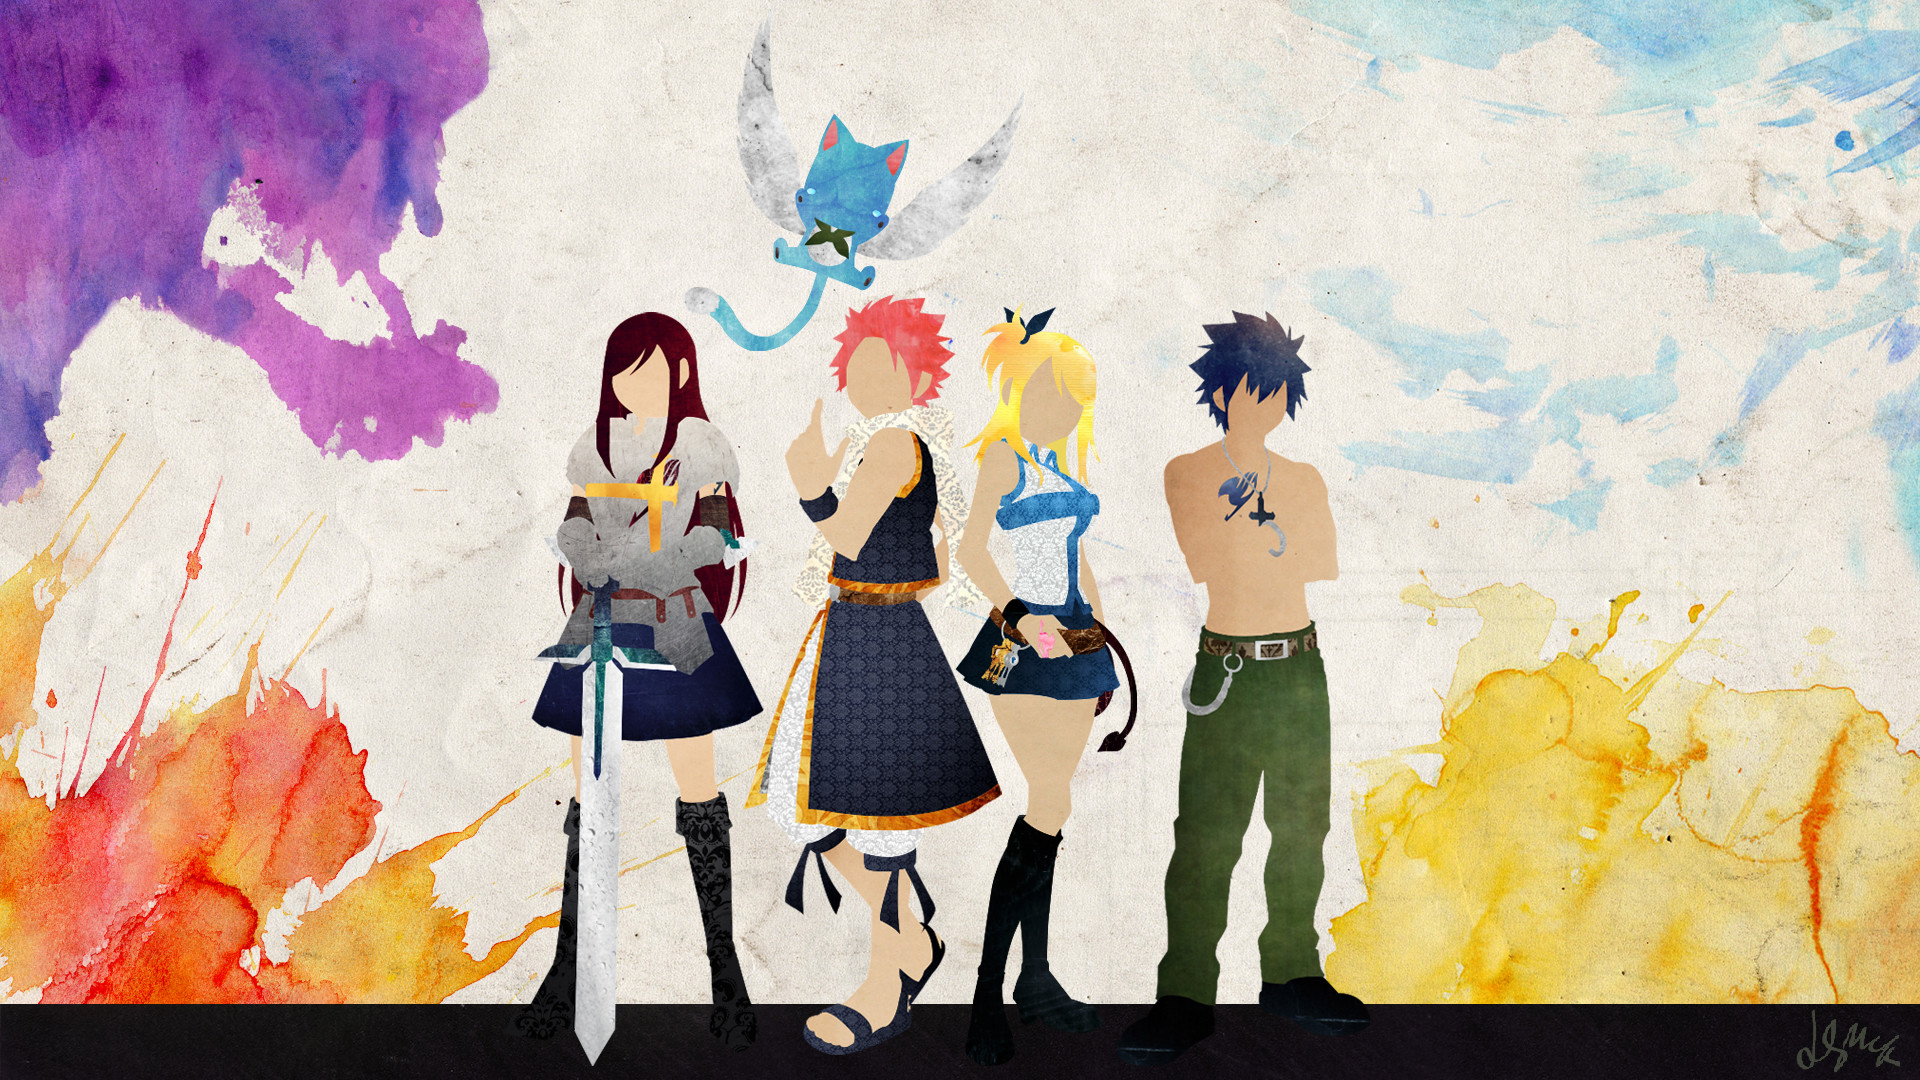 1920x1080 The final of my Fairy Tail wallpaper collection, the "Quintessence" Ended  up adding Happy into the mix, as in the end he is one of the main protago.